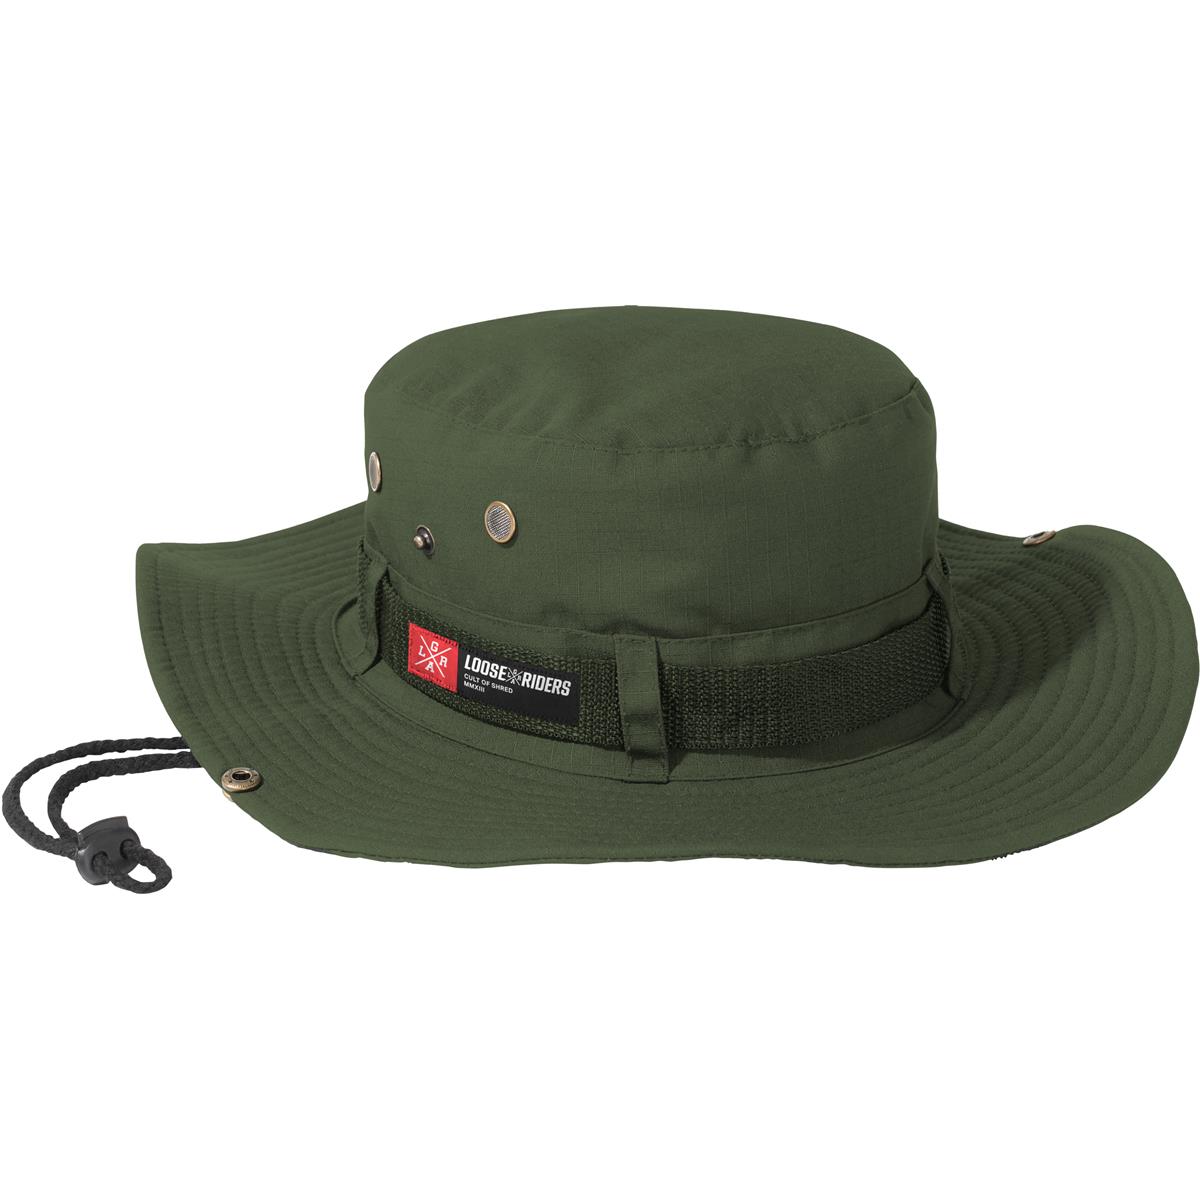 Loose Riders Hut Booney Hat Olive